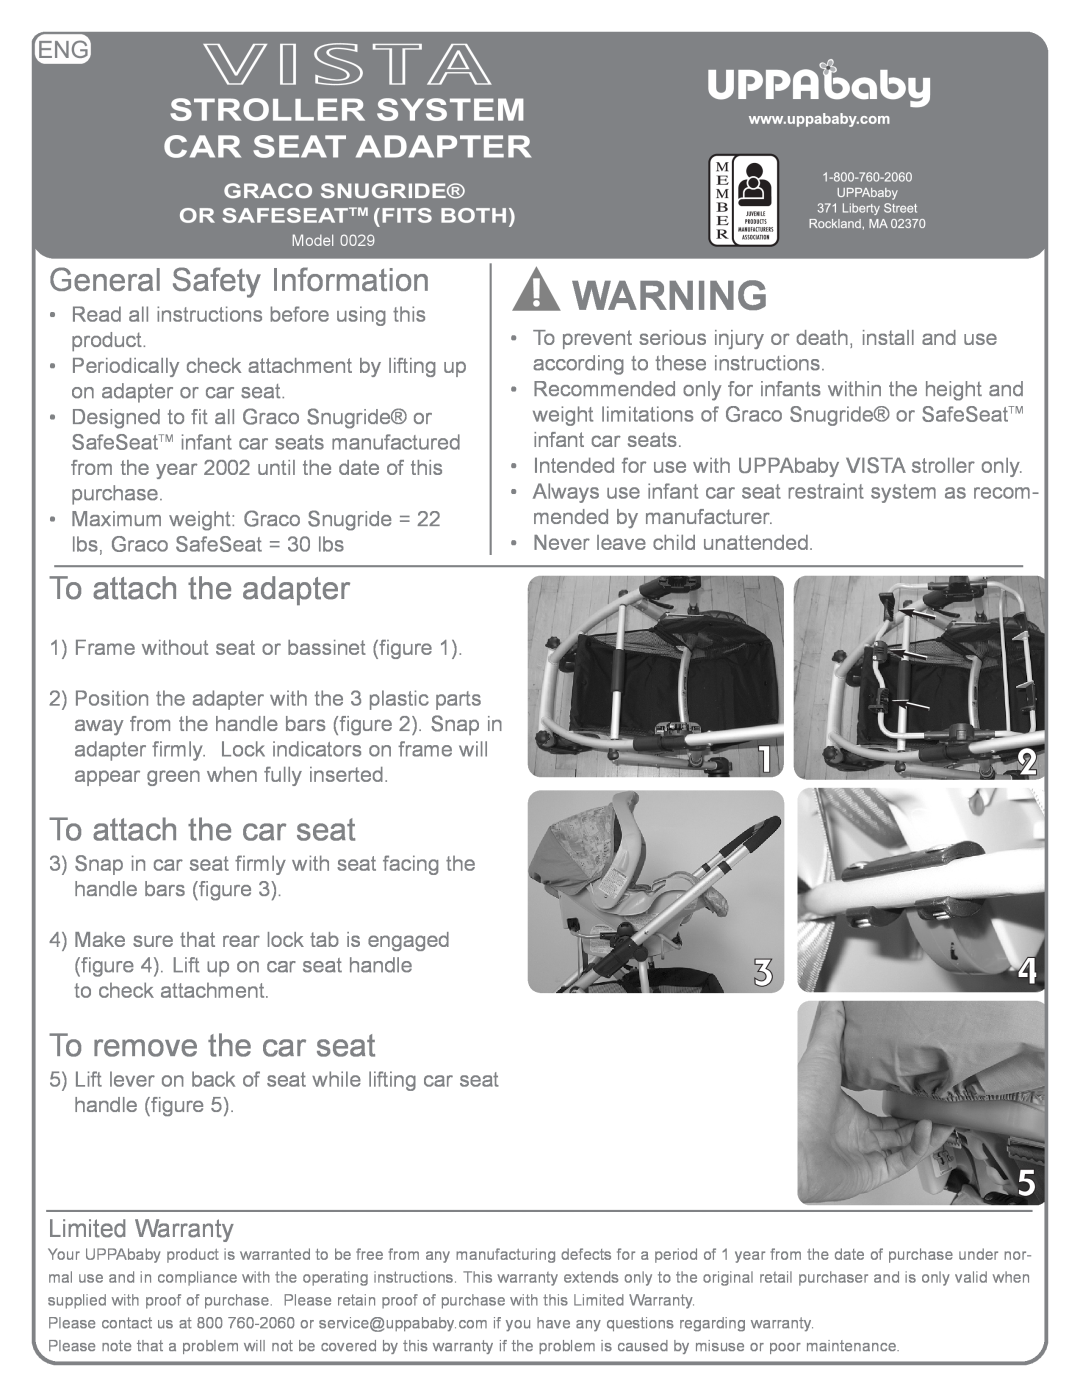 Vista 29 warranty General Safety Information, To attach the adapter, To attach the car seat, To remove the car seat 